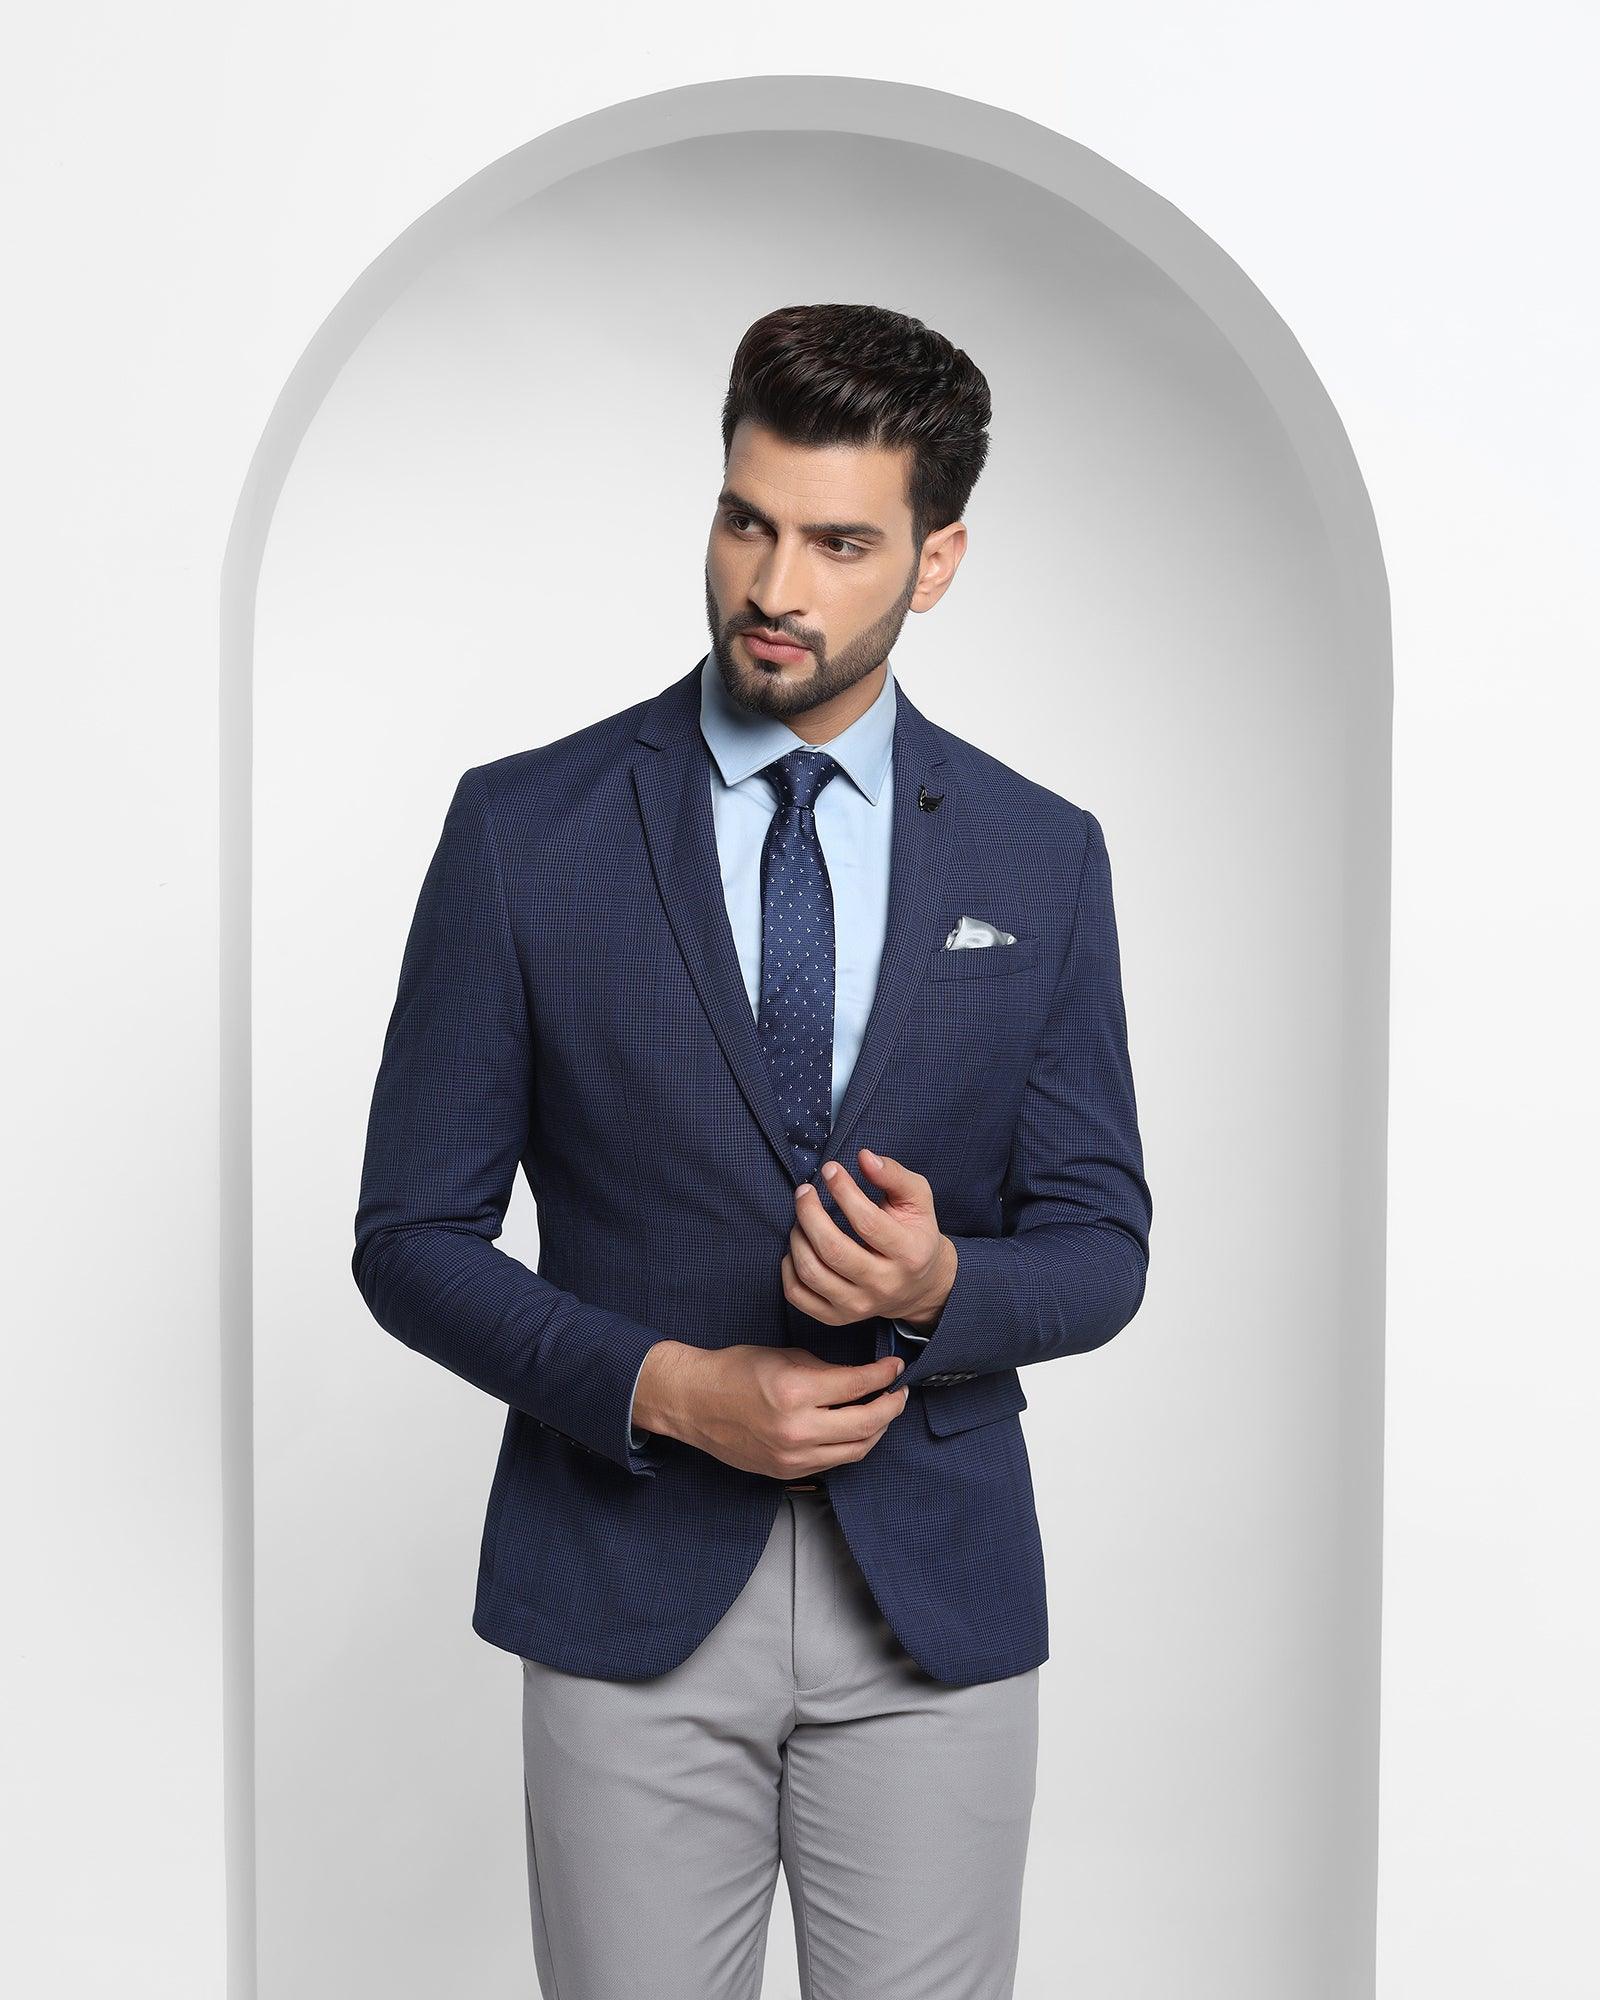 Which is the best brand suit to wear in India? - Quora